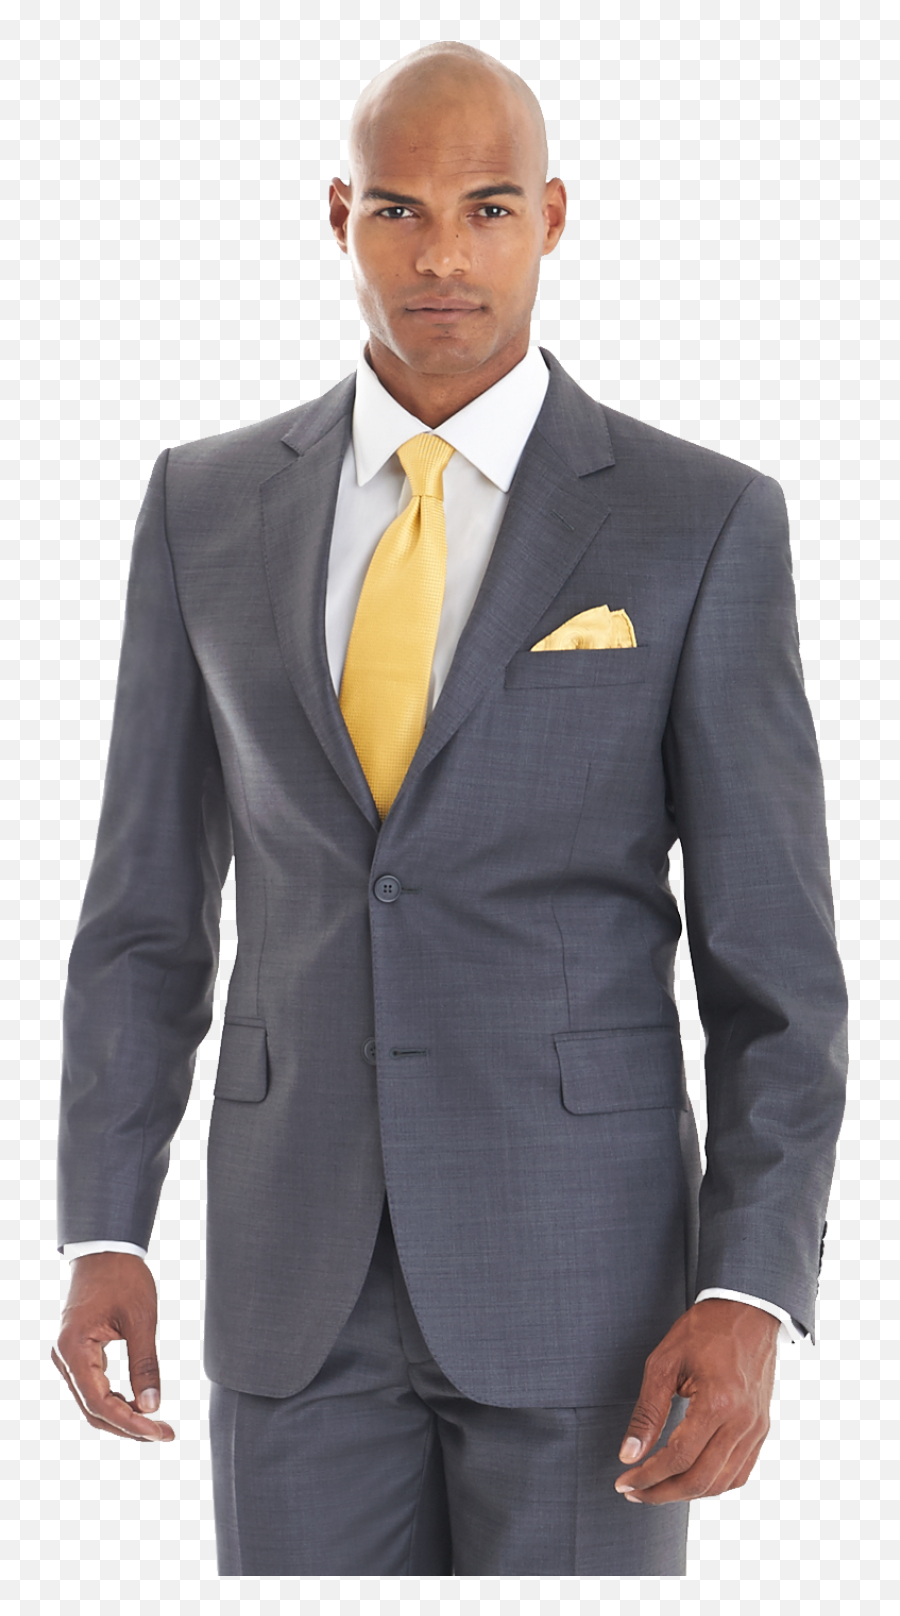 Suit Png Images Free Download - Man In Suit High Resolution,Man In Suit Png